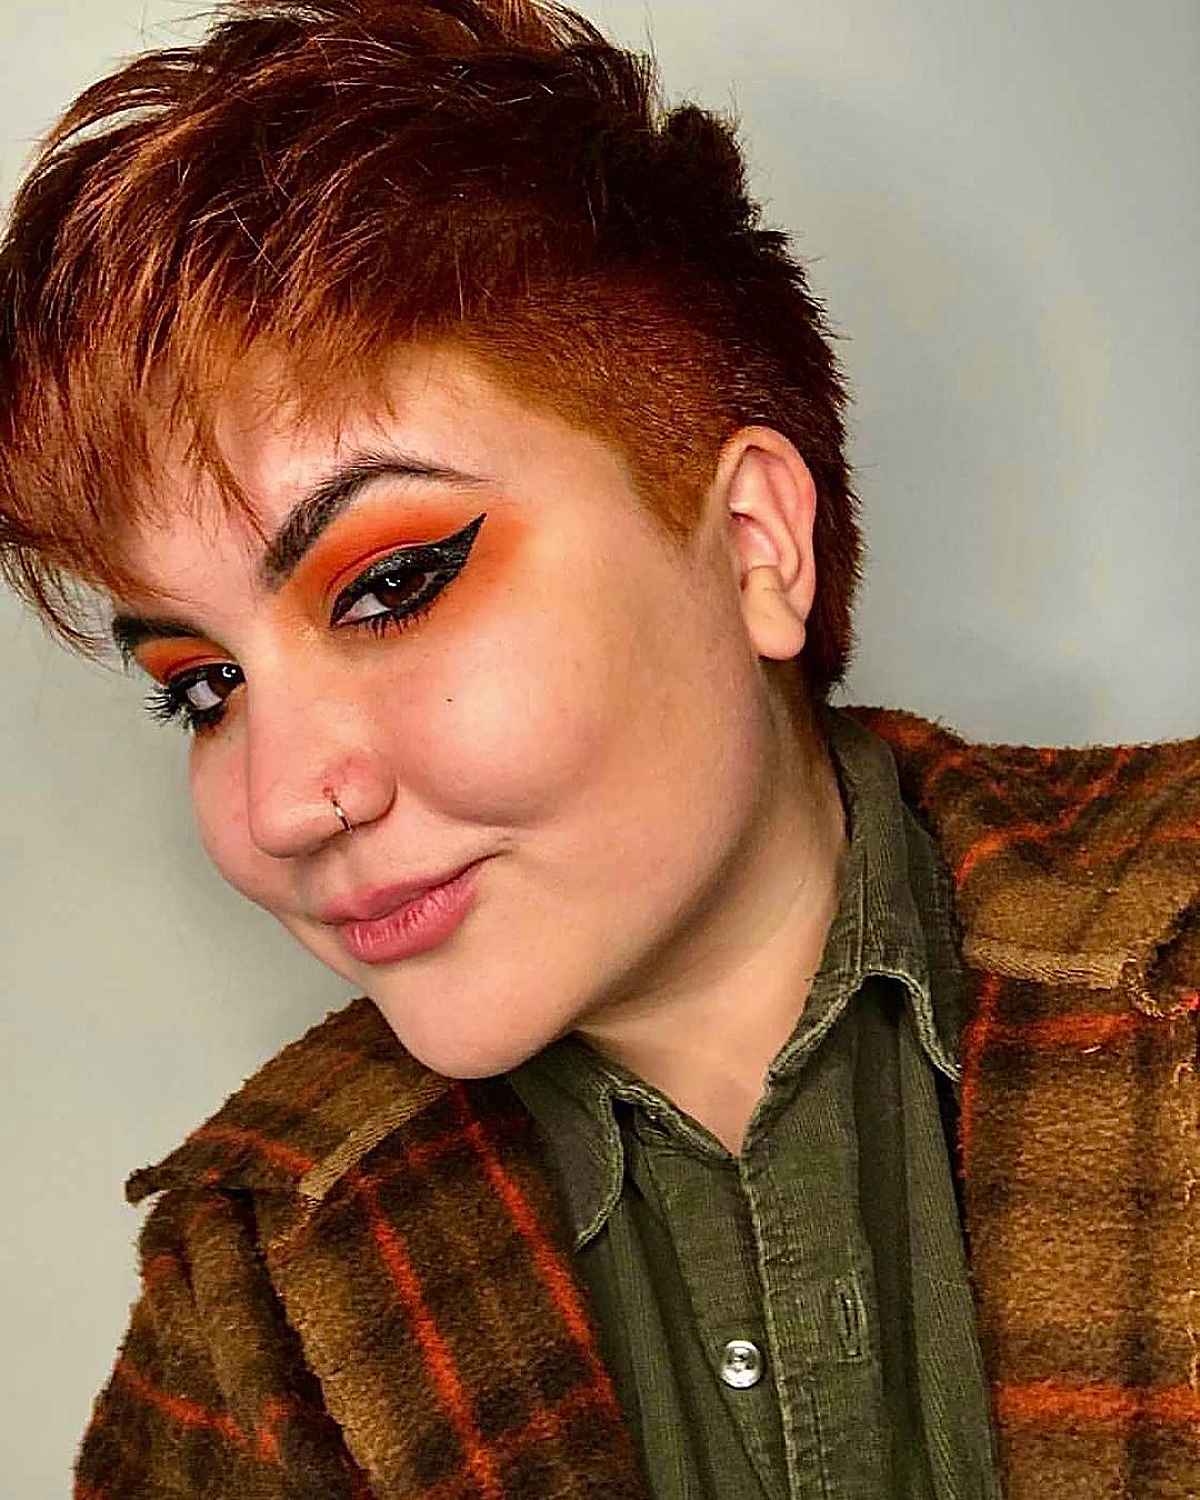 Mohawk Pixie Cut on Women with Chubby Cheeks